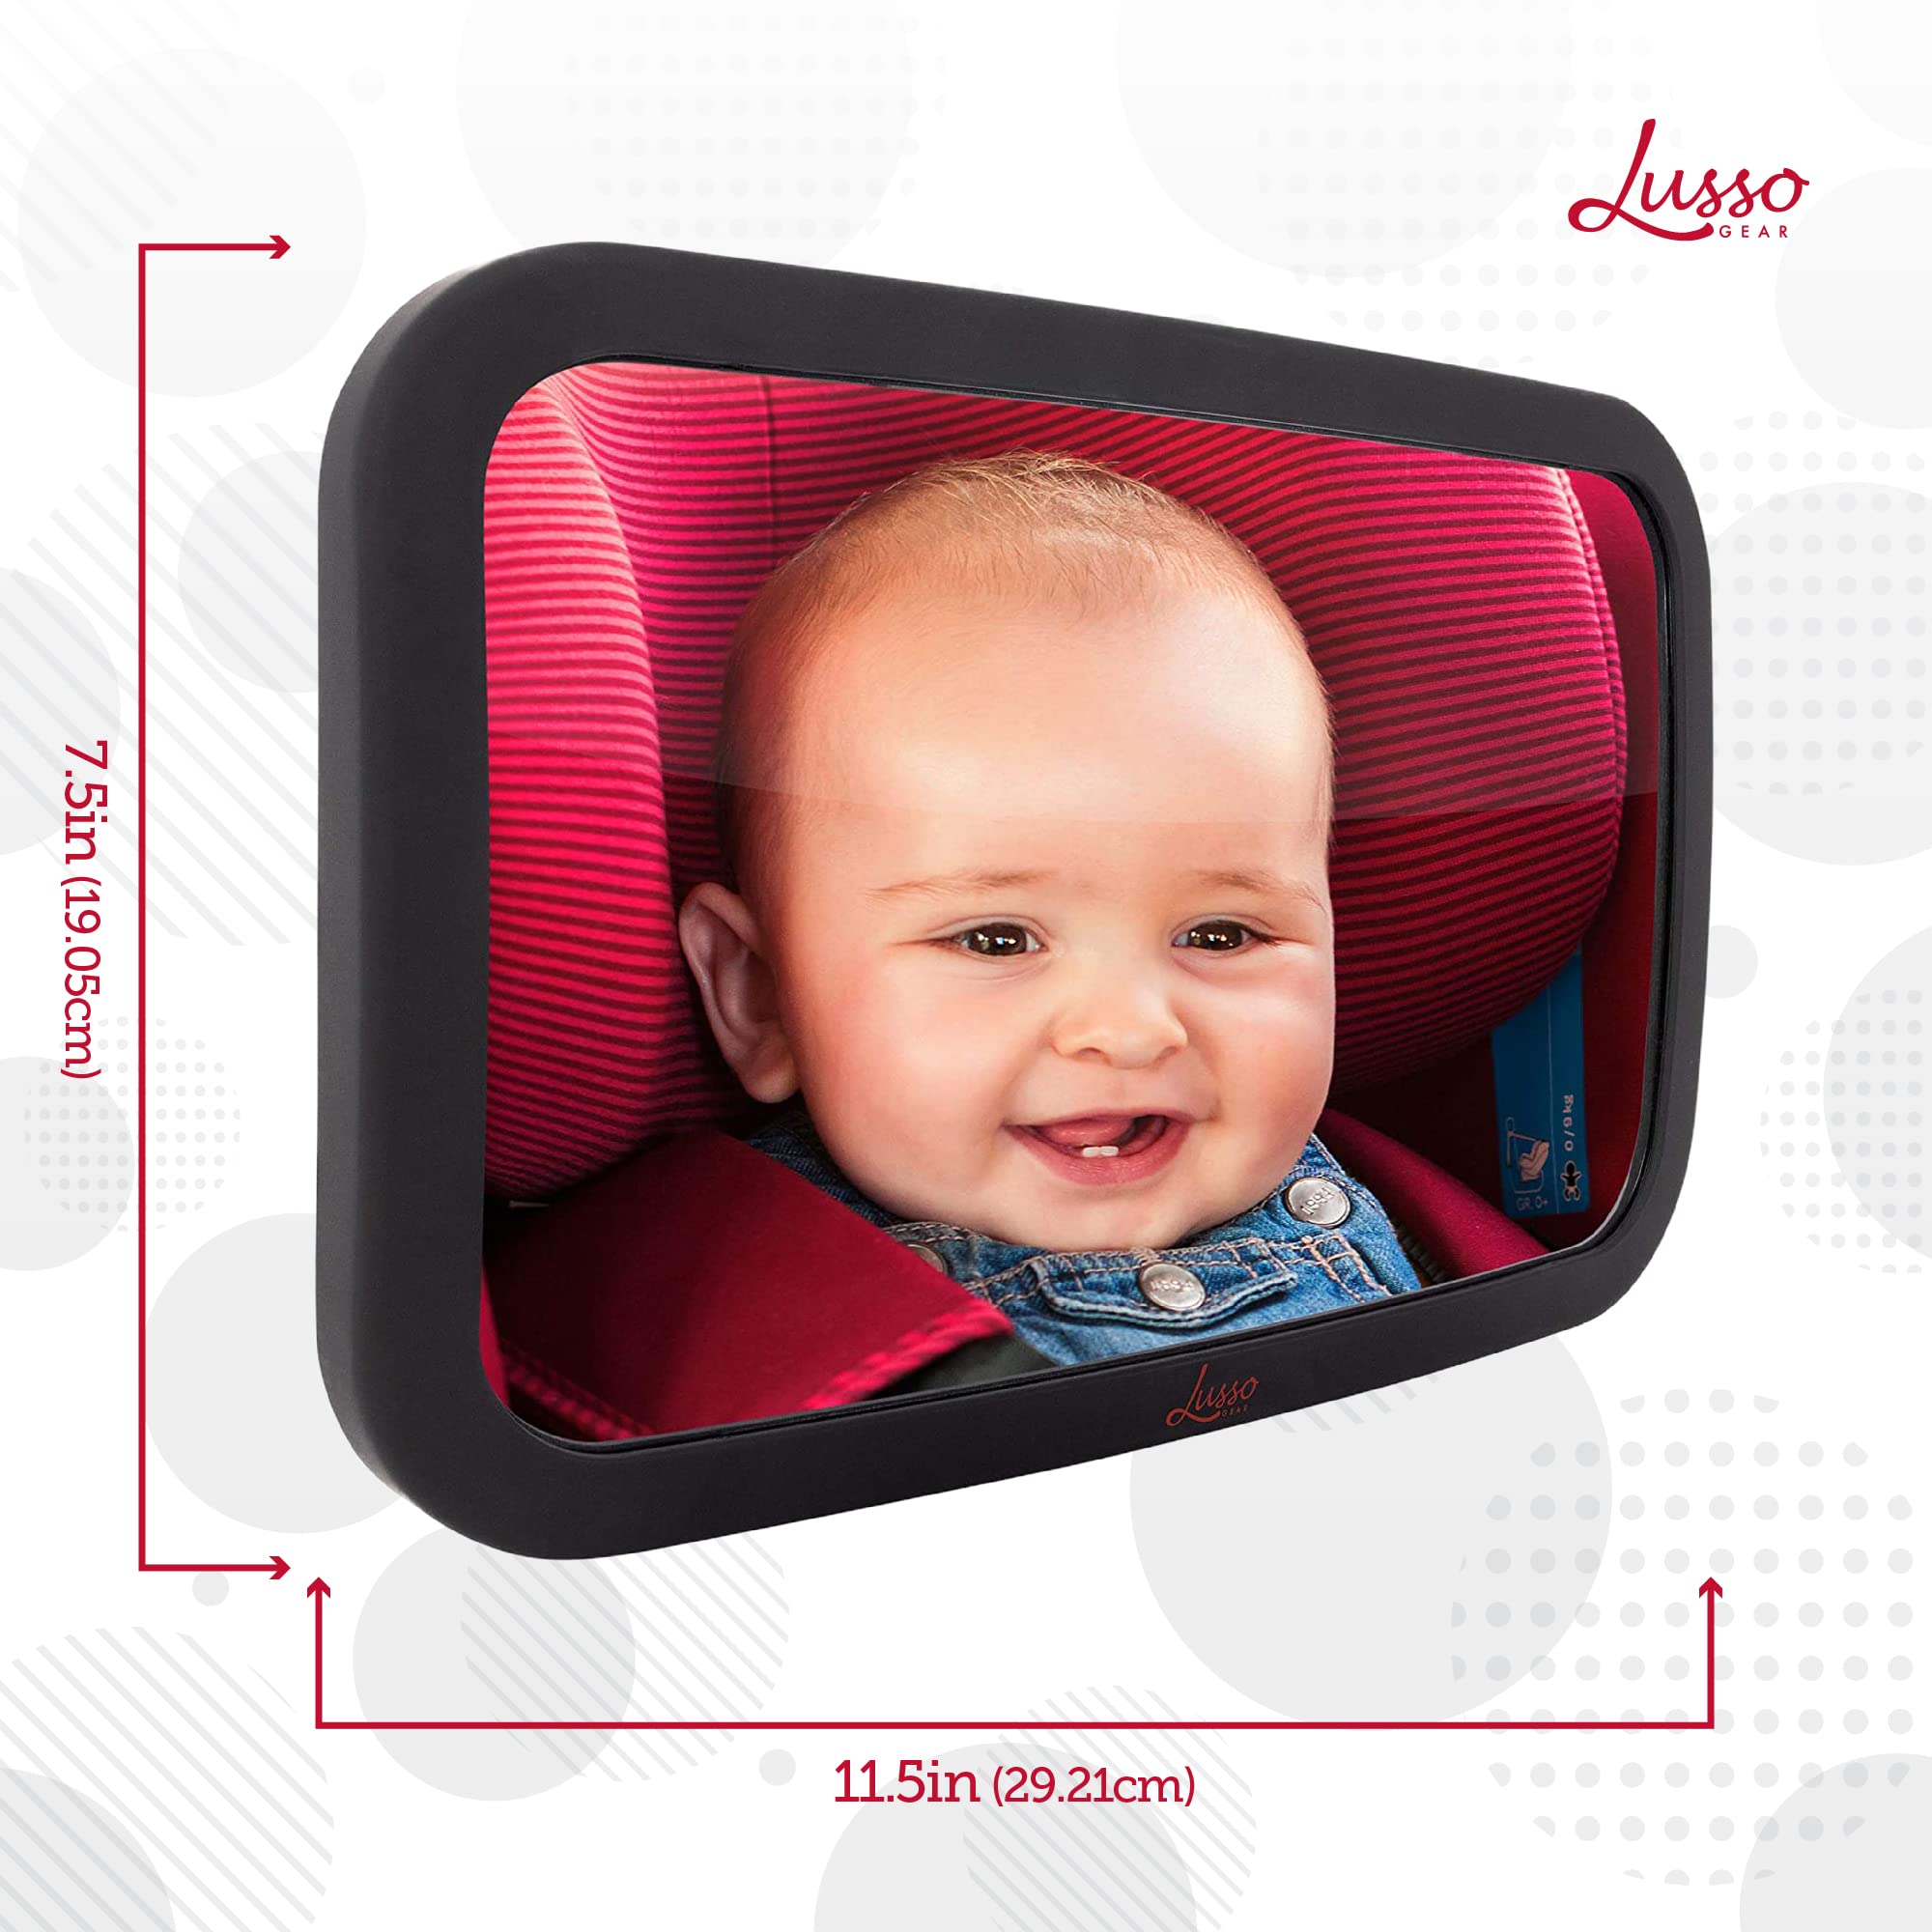 Lusso Gear Baby Backseat Mirror for Car. Largest and Most Stable Mirror with Premium Matte Finish, Crystal Clear View of Infant in Rear Facing Car Seat - Secure and Shatterproof (Tan)